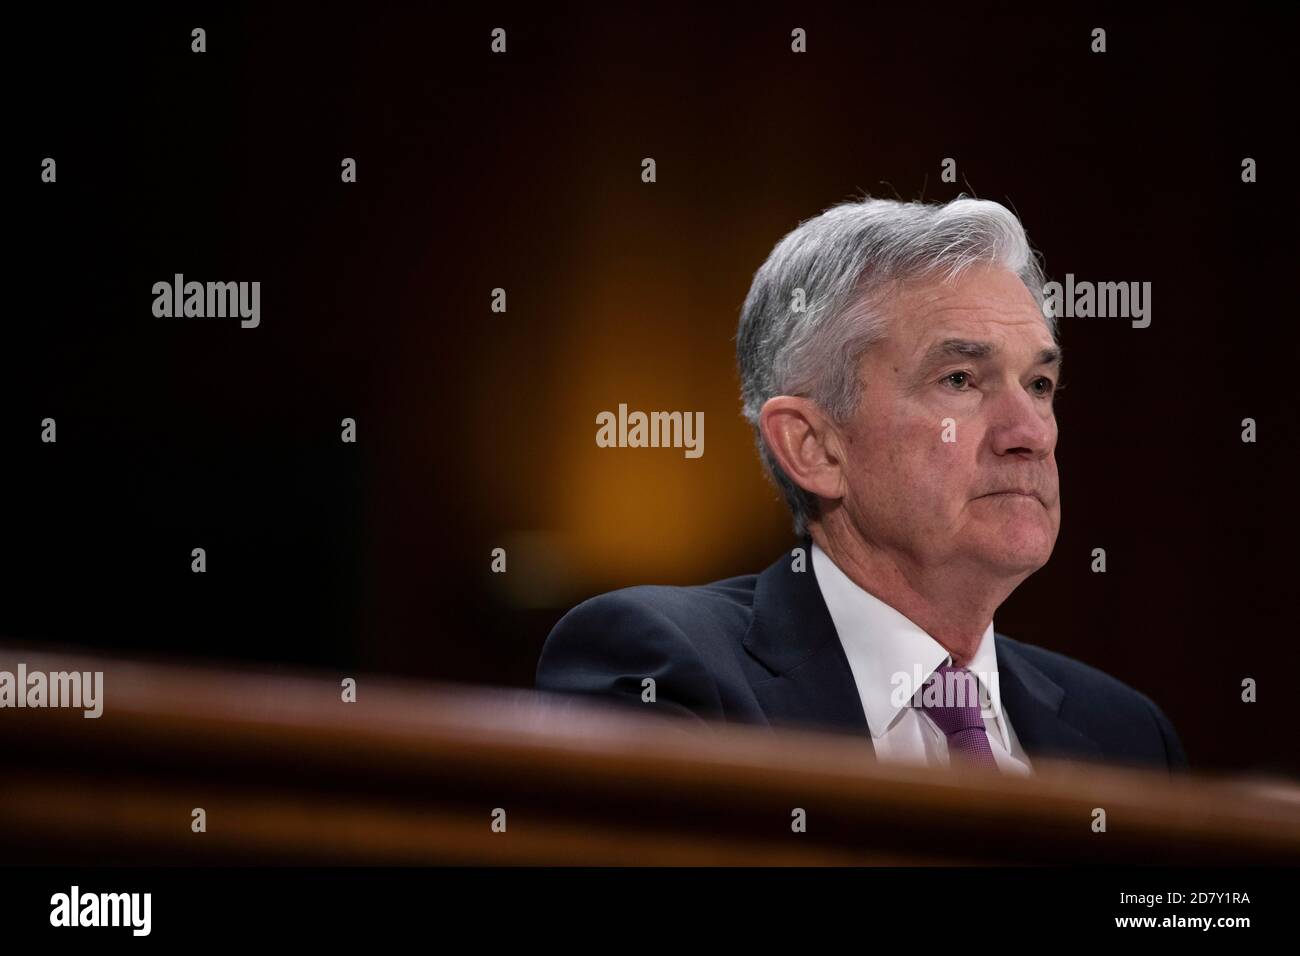 Jerome Powell, Chair of the Federal Reserve delivers the Federal Reserves' 'Semiannual Monetary Policy Report to Congress' before the Senate Banking Committee on Capitol Hill in Washington, D.C. on February 26, 2019. Credit: Alex Edelman/The Photo Access Stock Photo